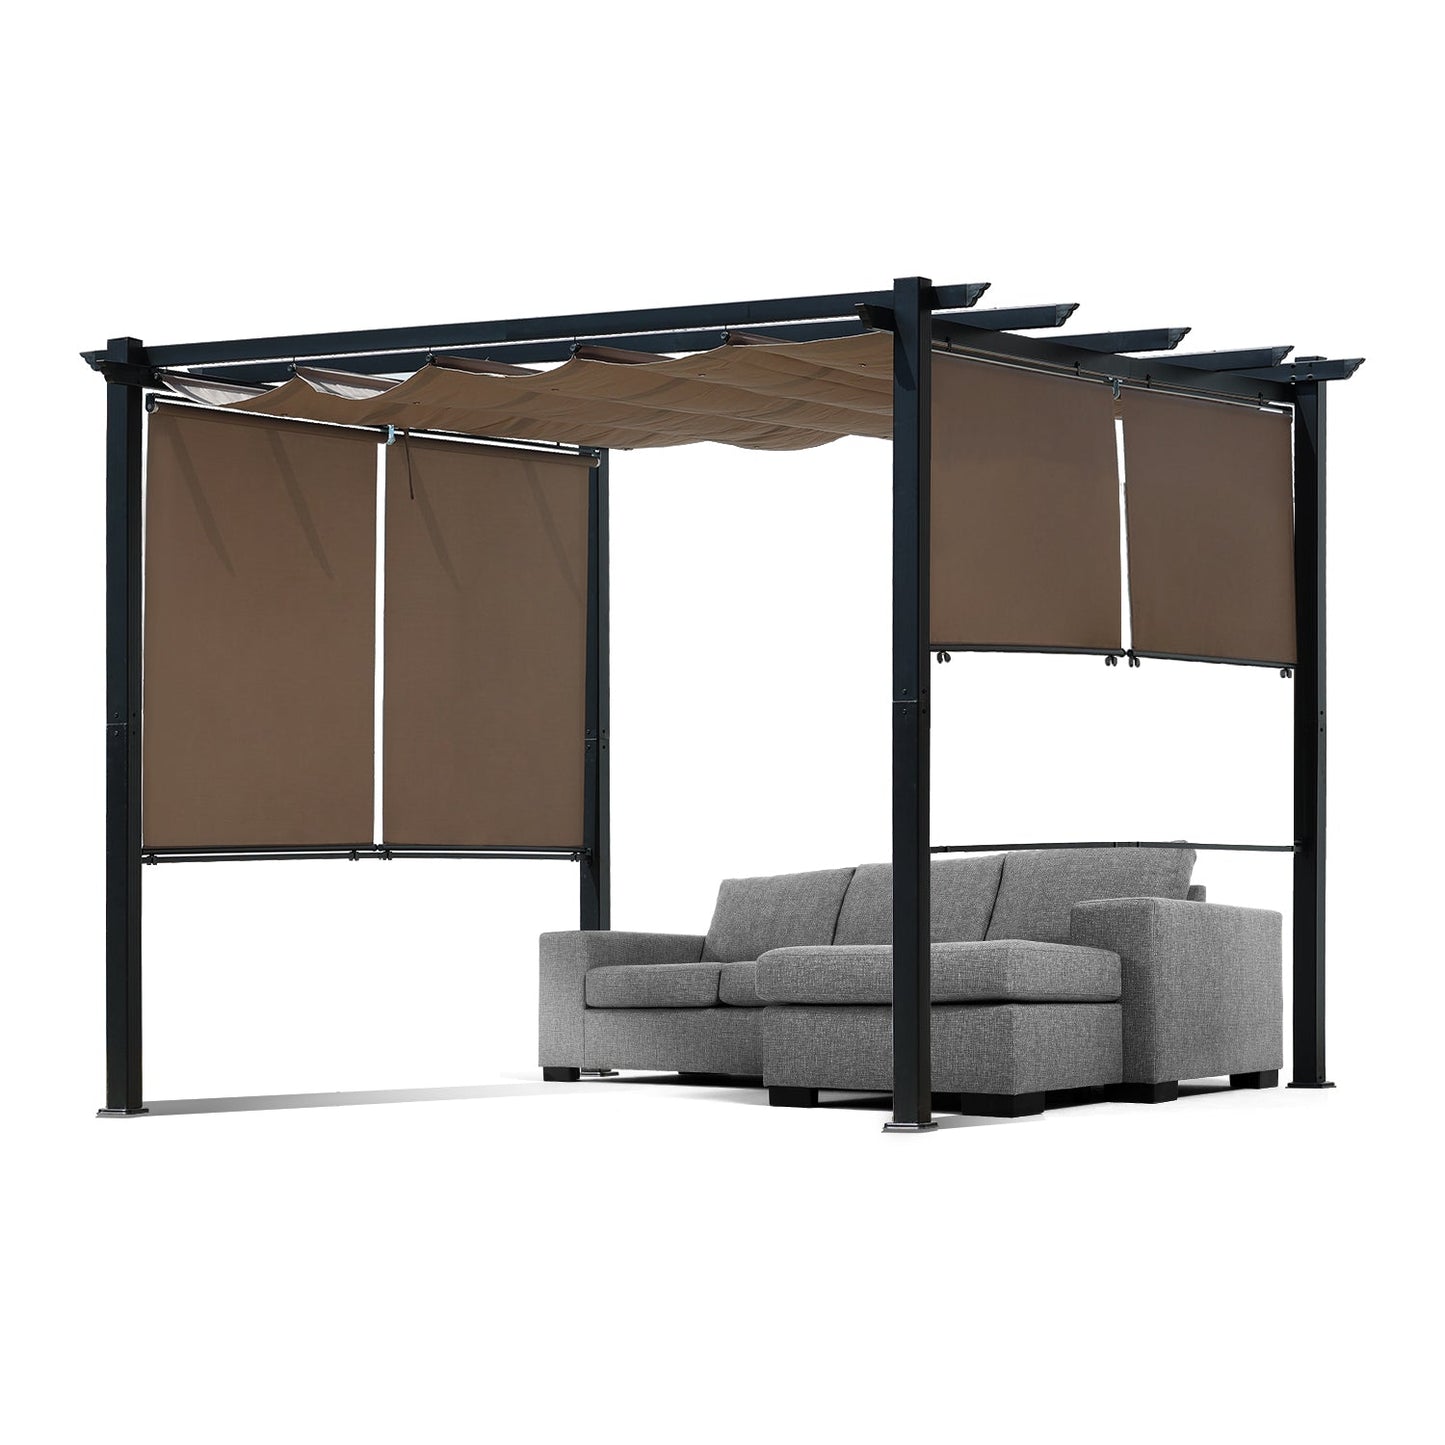 10 x 10 FT Outdoor Pergola with Shade Canopy, Aluminum Frame, Roller Shade Curtain Pergola Aoodor 10×10 Ft. Brown 